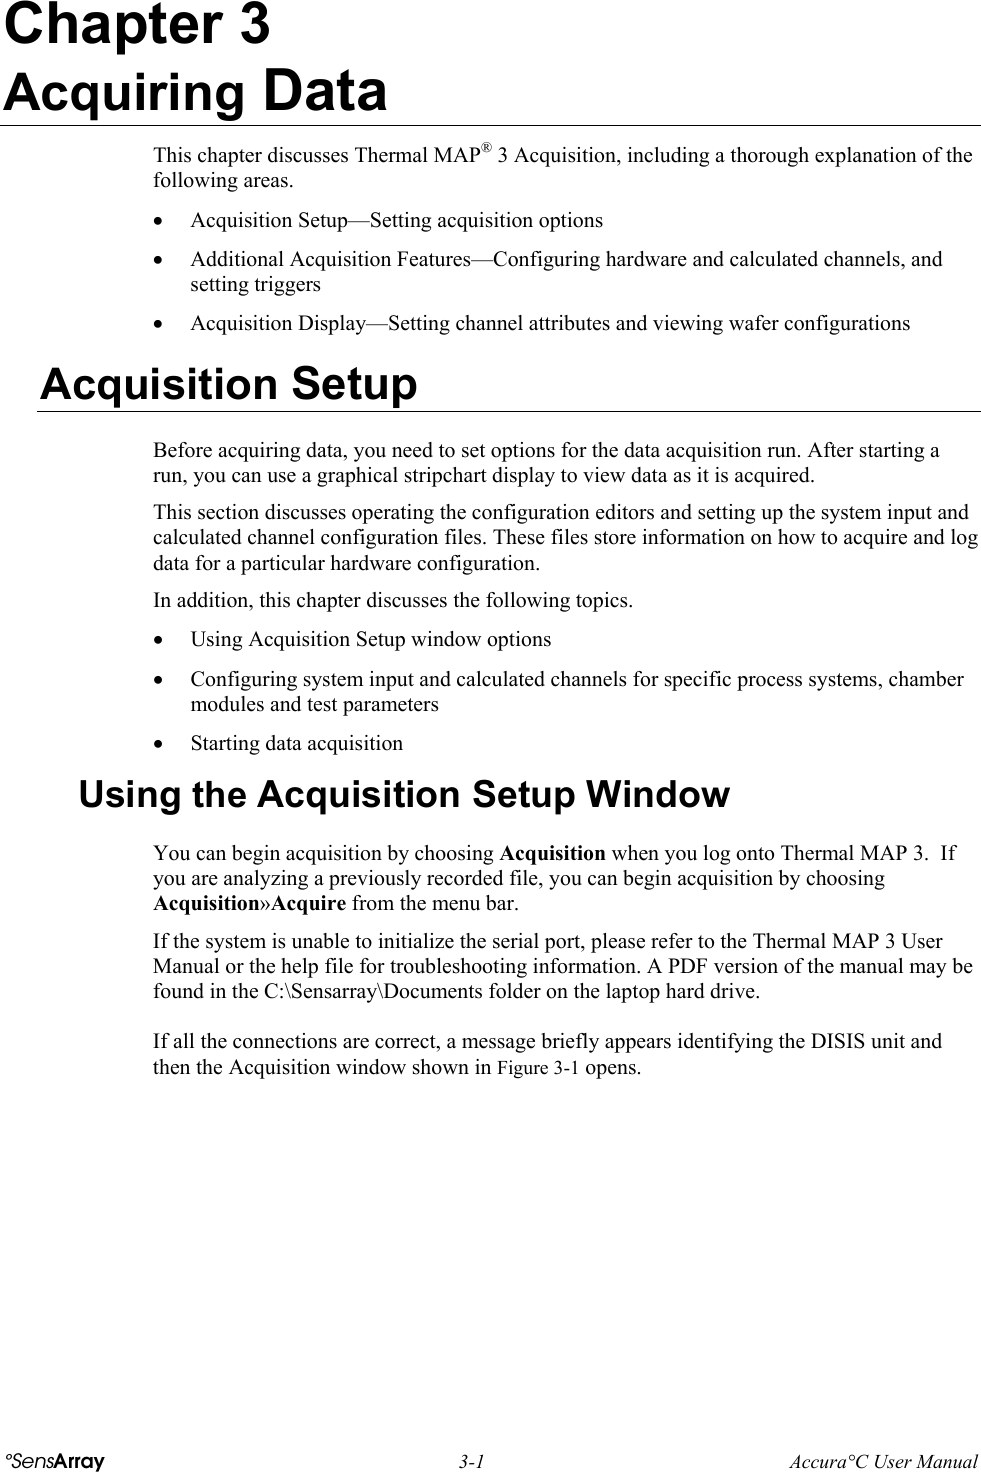 Chapter 3 Acquiring Data This chapter discusses Thermal MAP® 3 Acquisition, including a thorough explanation of the following areas. •  Acquisition Setup—Setting acquisition options  •  Additional Acquisition Features—Configuring hardware and calculated channels, and setting triggers •  Acquisition Display—Setting channel attributes and viewing wafer configurations Acquisition Setup Before acquiring data, you need to set options for the data acquisition run. After starting a run, you can use a graphical stripchart display to view data as it is acquired.  This section discusses operating the configuration editors and setting up the system input and calculated channel configuration files. These files store information on how to acquire and log data for a particular hardware configuration.  In addition, this chapter discusses the following topics.  •  Using Acquisition Setup window options •  Configuring system input and calculated channels for specific process systems, chamber modules and test parameters •  Starting data acquisition Using the Acquisition Setup Window You can begin acquisition by choosing Acquisition when you log onto Thermal MAP 3.  If you are analyzing a previously recorded file, you can begin acquisition by choosing Acquisition»Acquire from the menu bar. If the system is unable to initialize the serial port, please refer to the Thermal MAP 3 User Manual or the help file for troubleshooting information. A PDF version of the manual may be found in the C:\Sensarray\Documents folder on the laptop hard drive. If all the connections are correct, a message briefly appears identifying the DISIS unit and then the Acquisition window shown in Figure 3-1 opens. °SensArray  3-1  Accura°C User Manual 